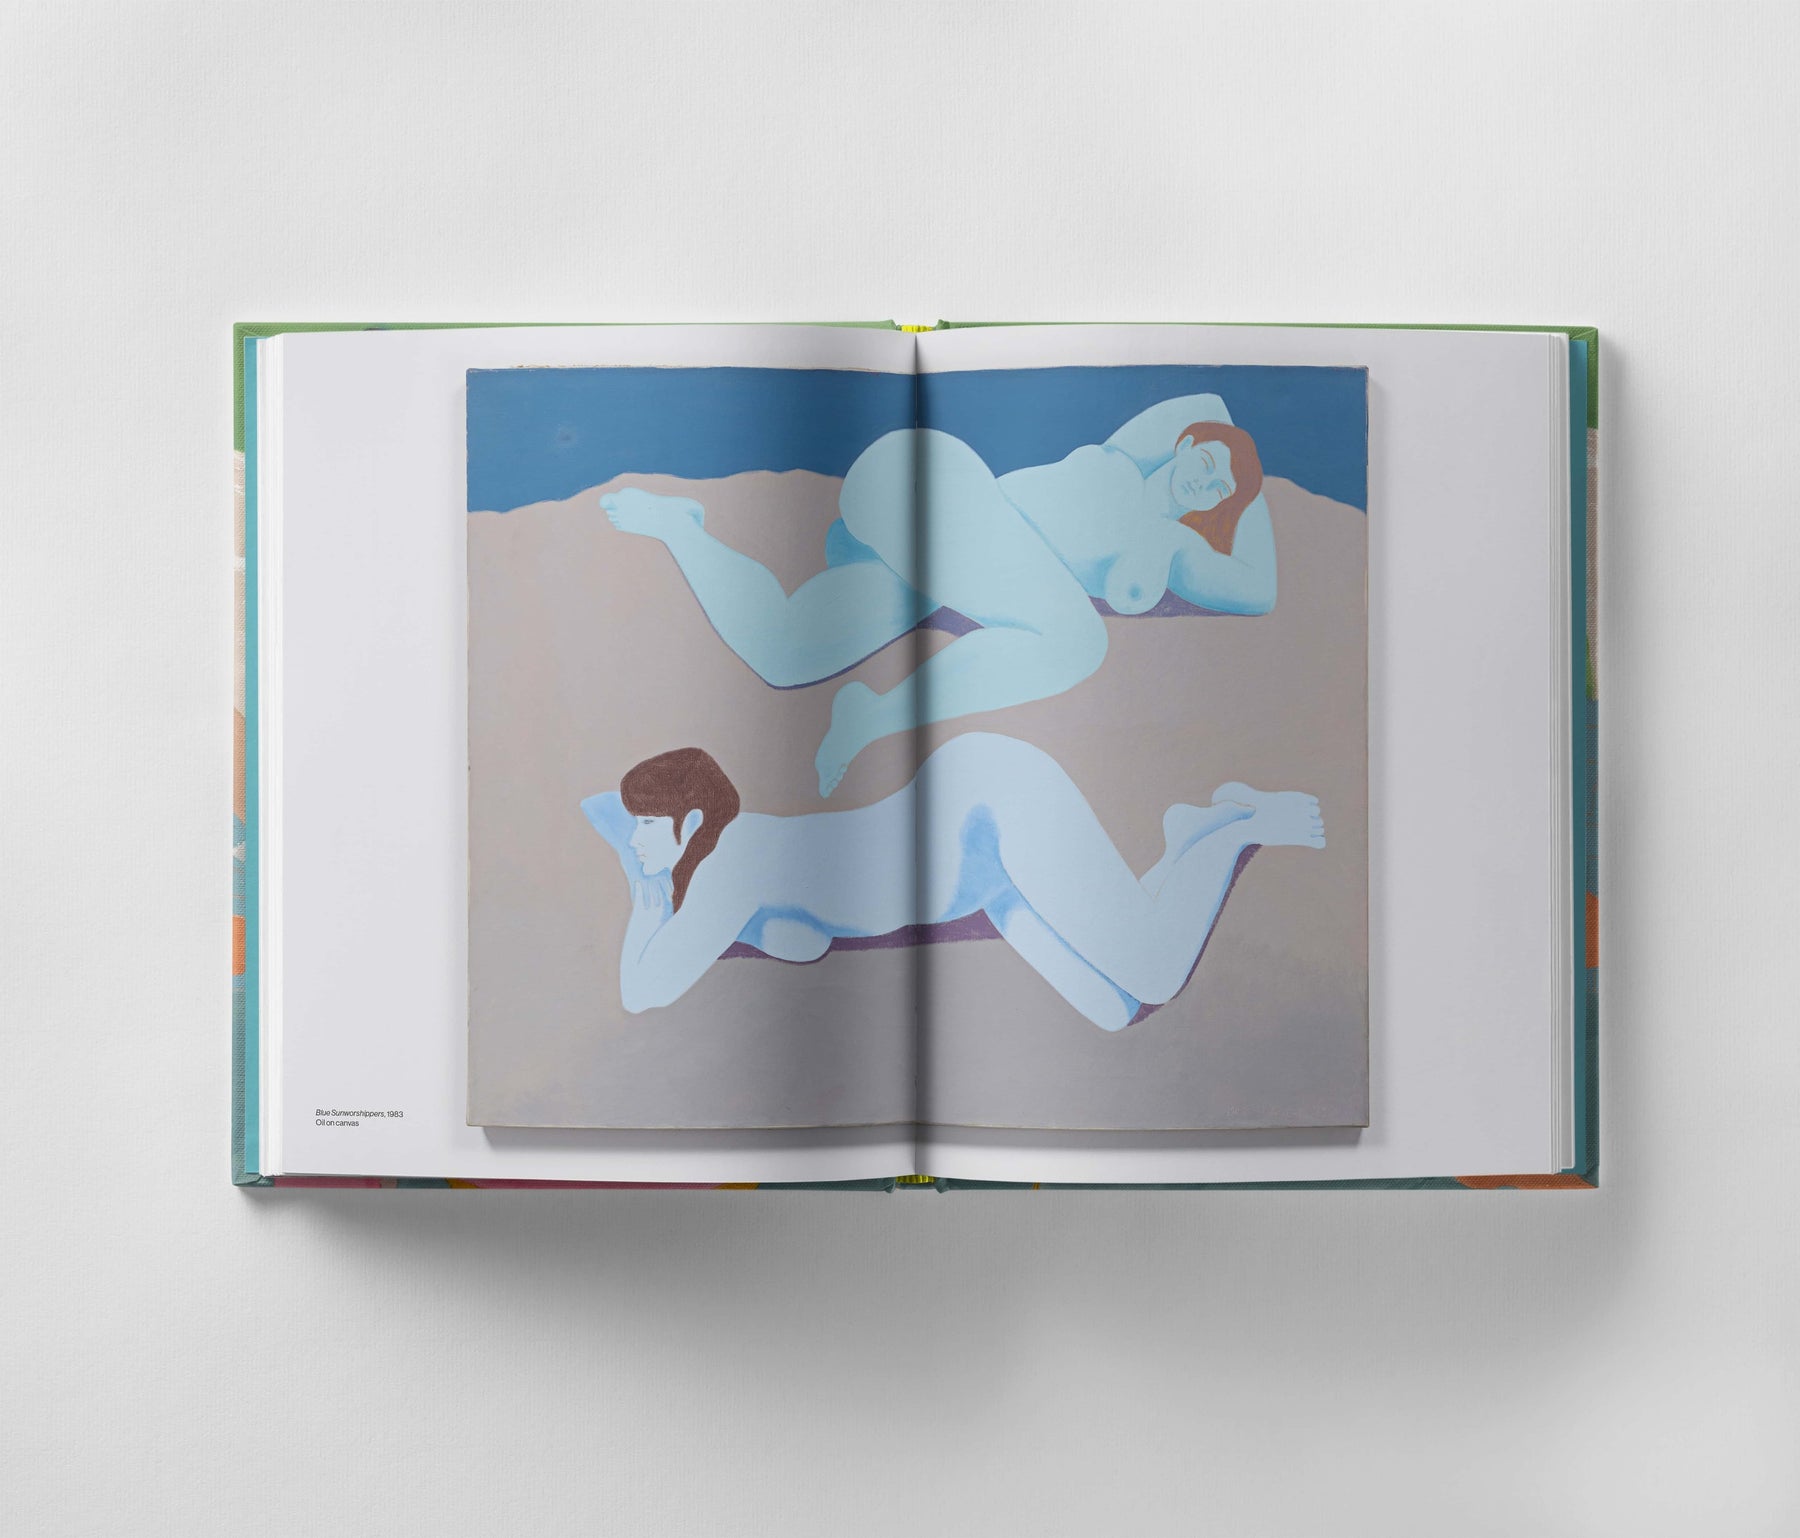 Open book displaying an oil painting by March Avery, illustrating two abstract nude reclining figures in shades of blue and beige from the Black Dog Online publication, "March Avery: A Life in Color".